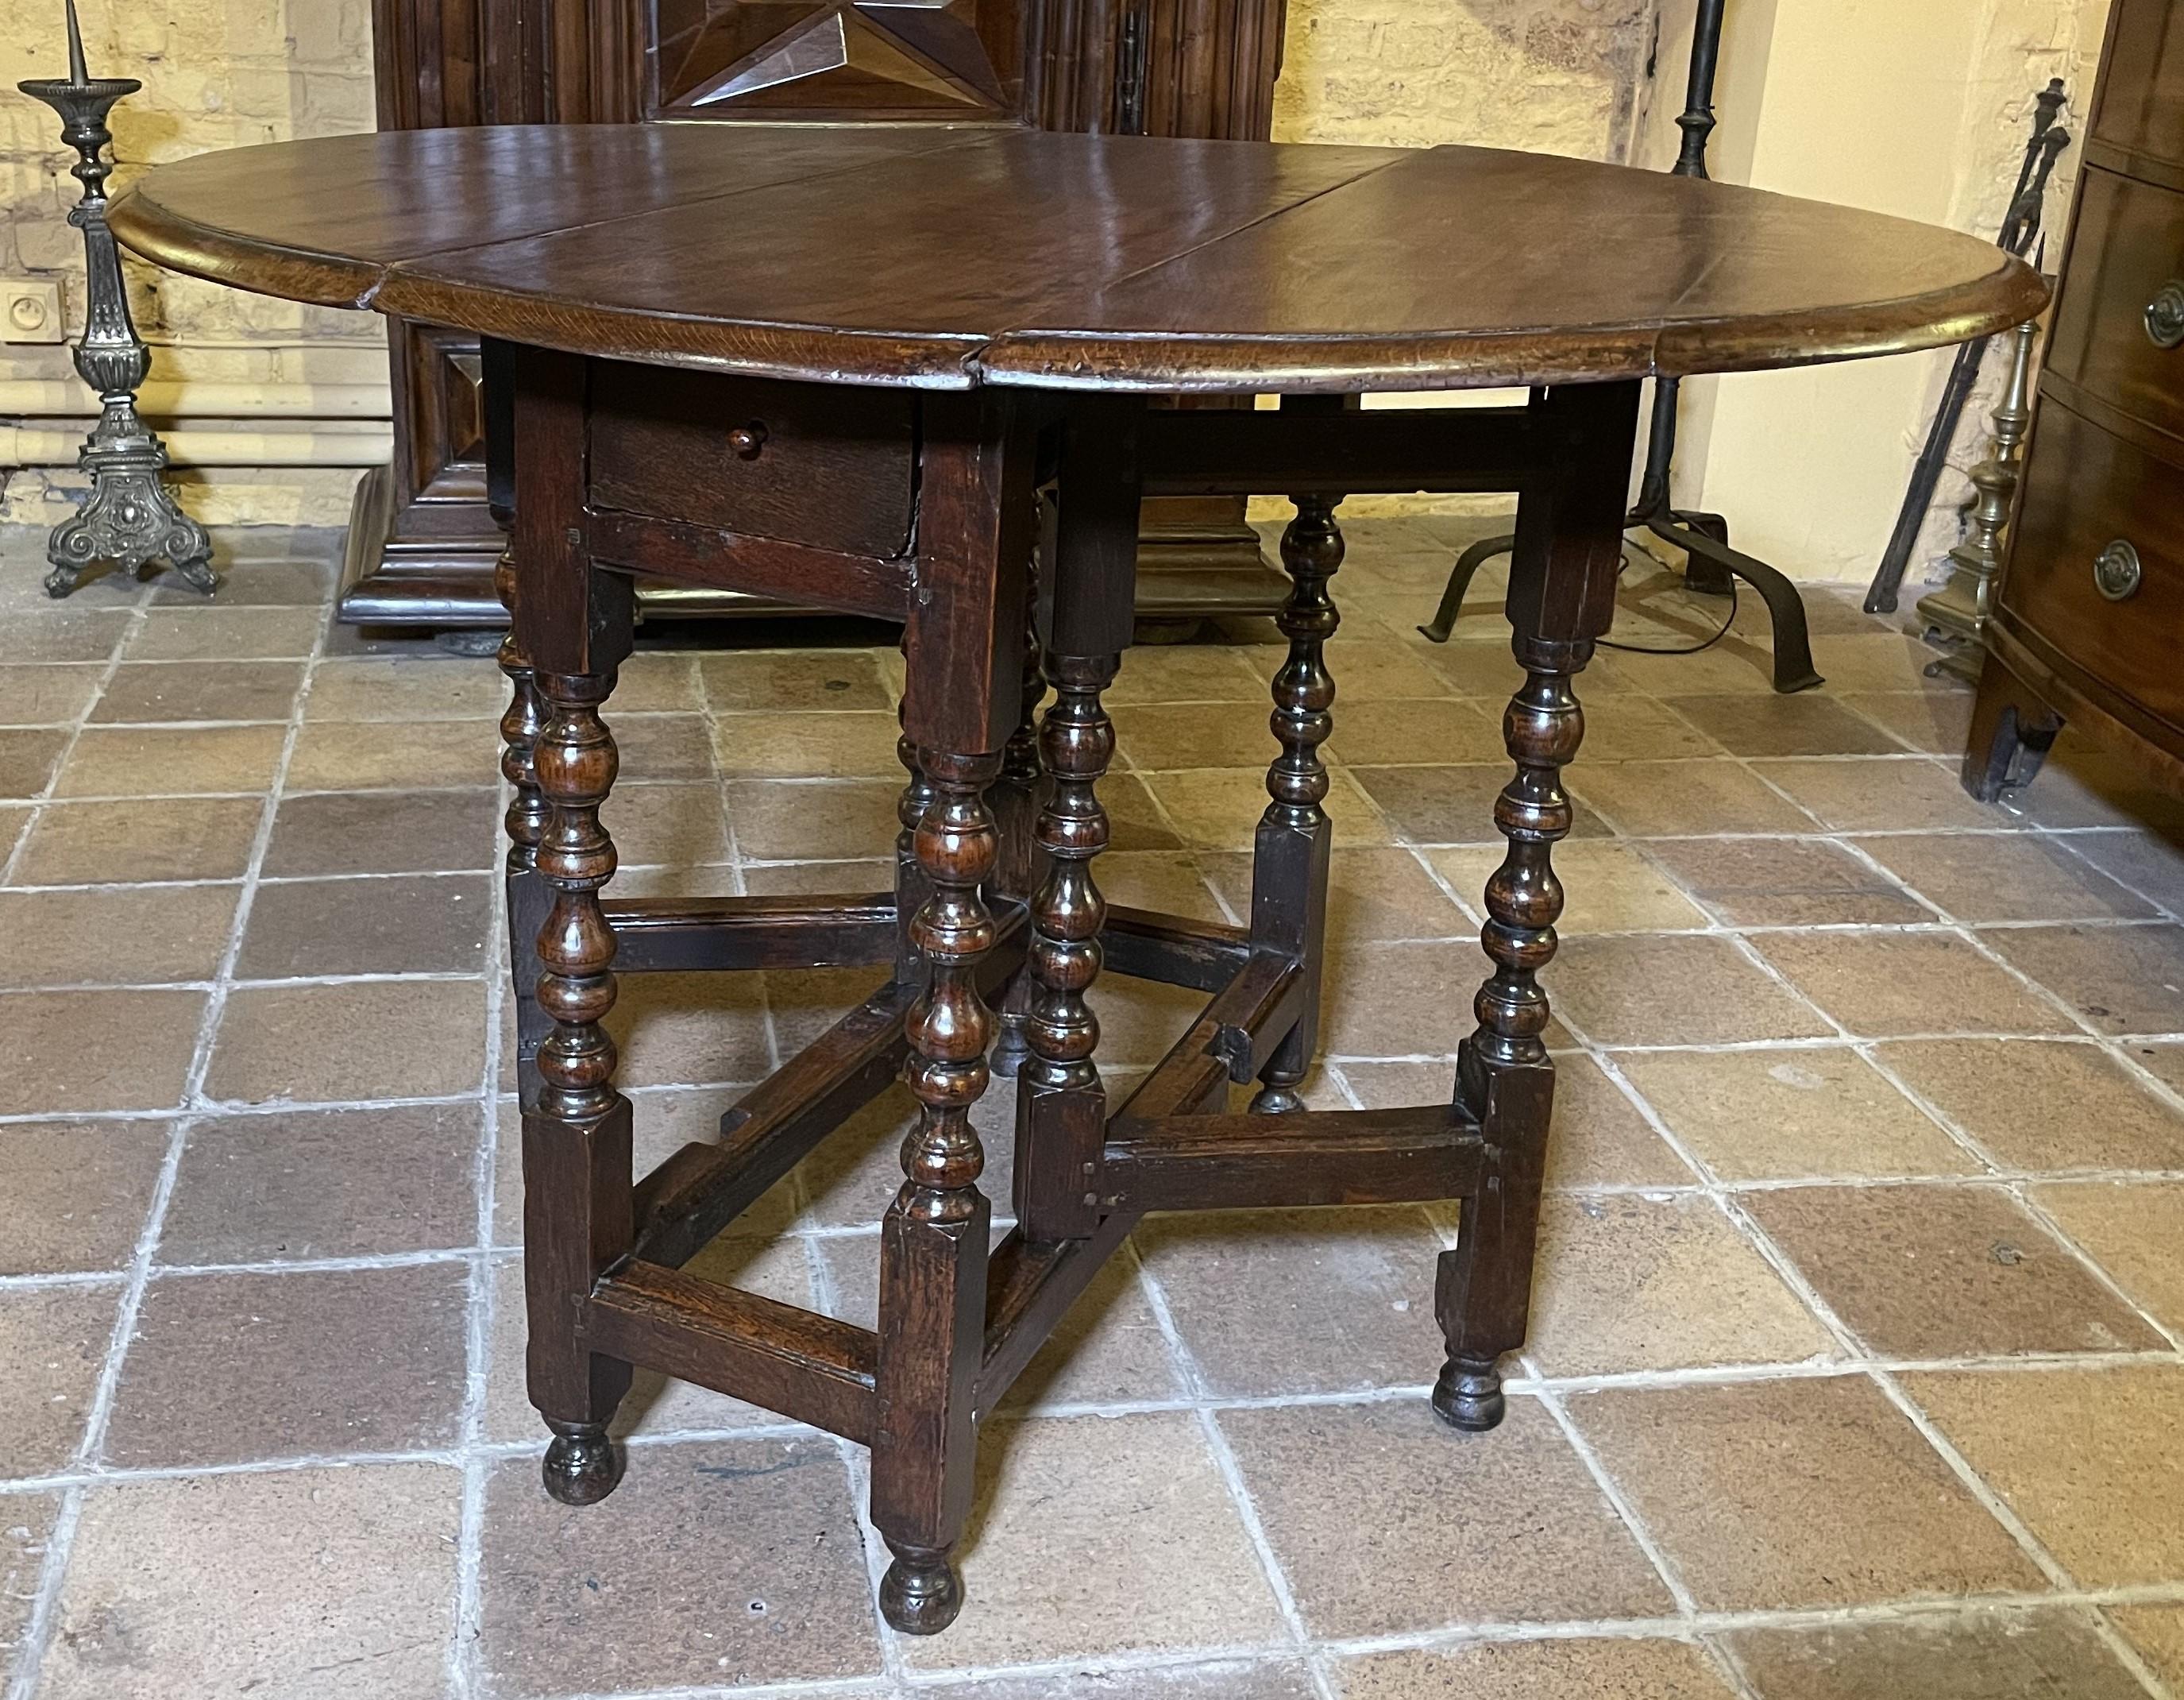 lovely little oak table from the 17 century from England called Gateleg table

Very nice little table which has a superb turning and a drawer in the belt

the table can be used as an decorative table, as a small closed console or as a half-open